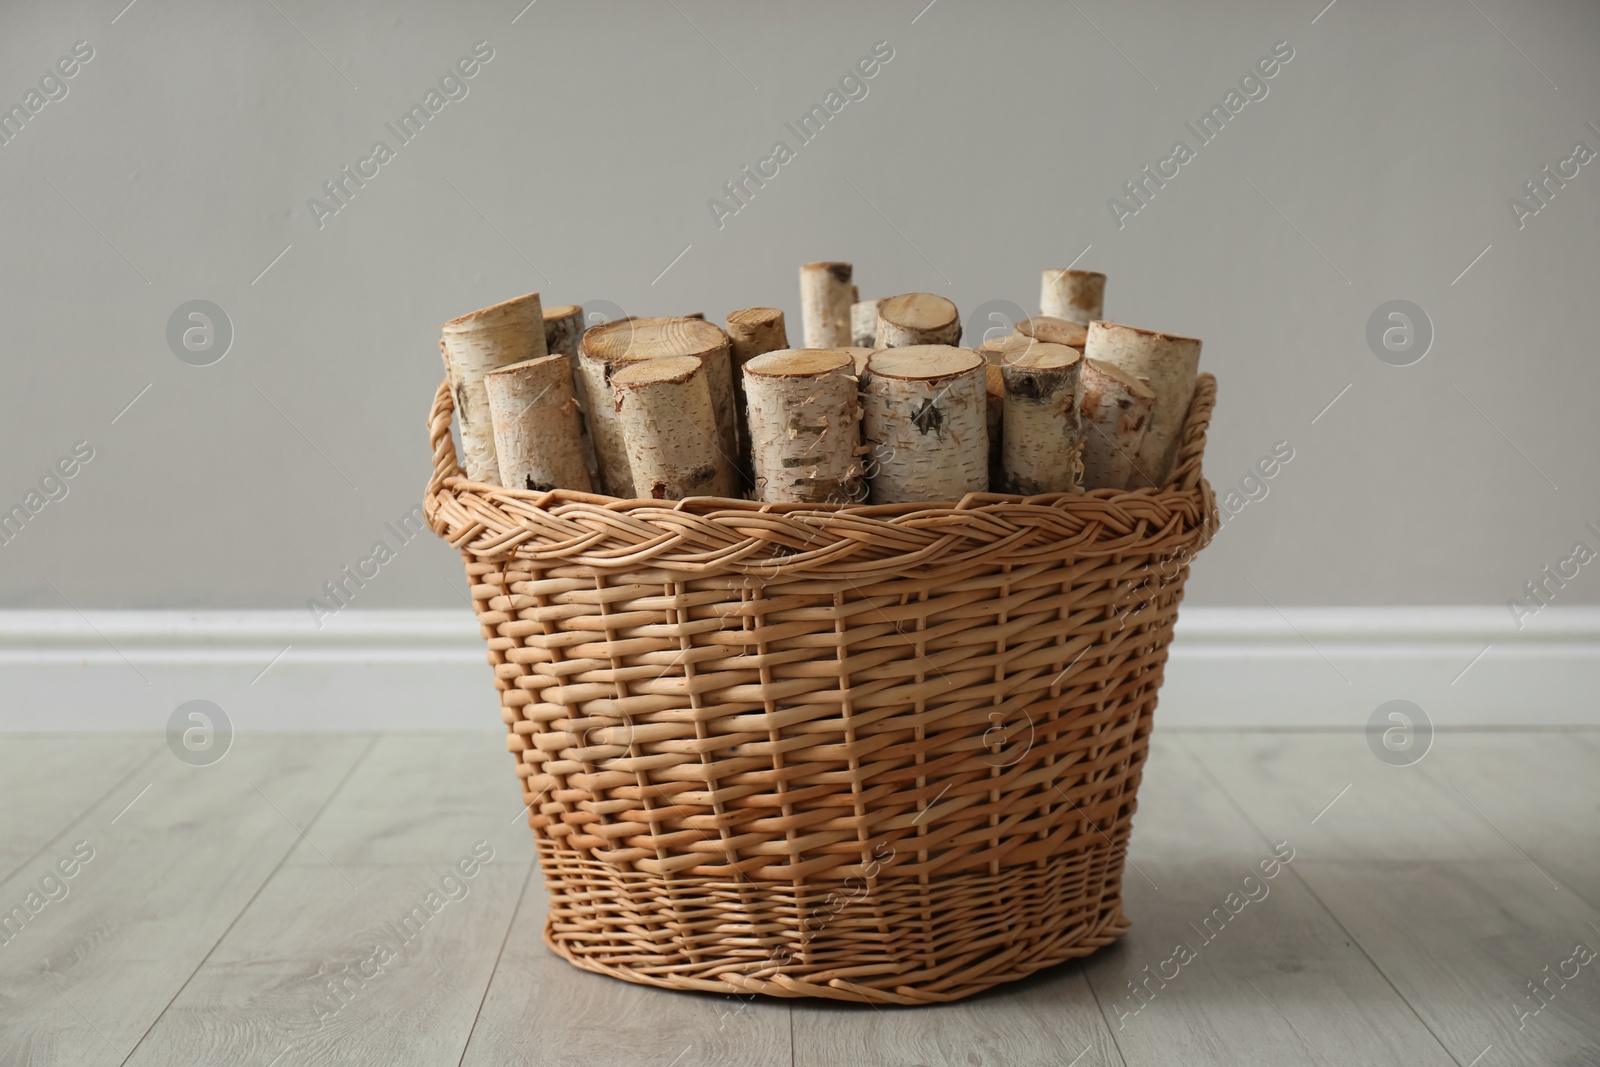 Photo of Wicker basket with firewood near grey wall indoors